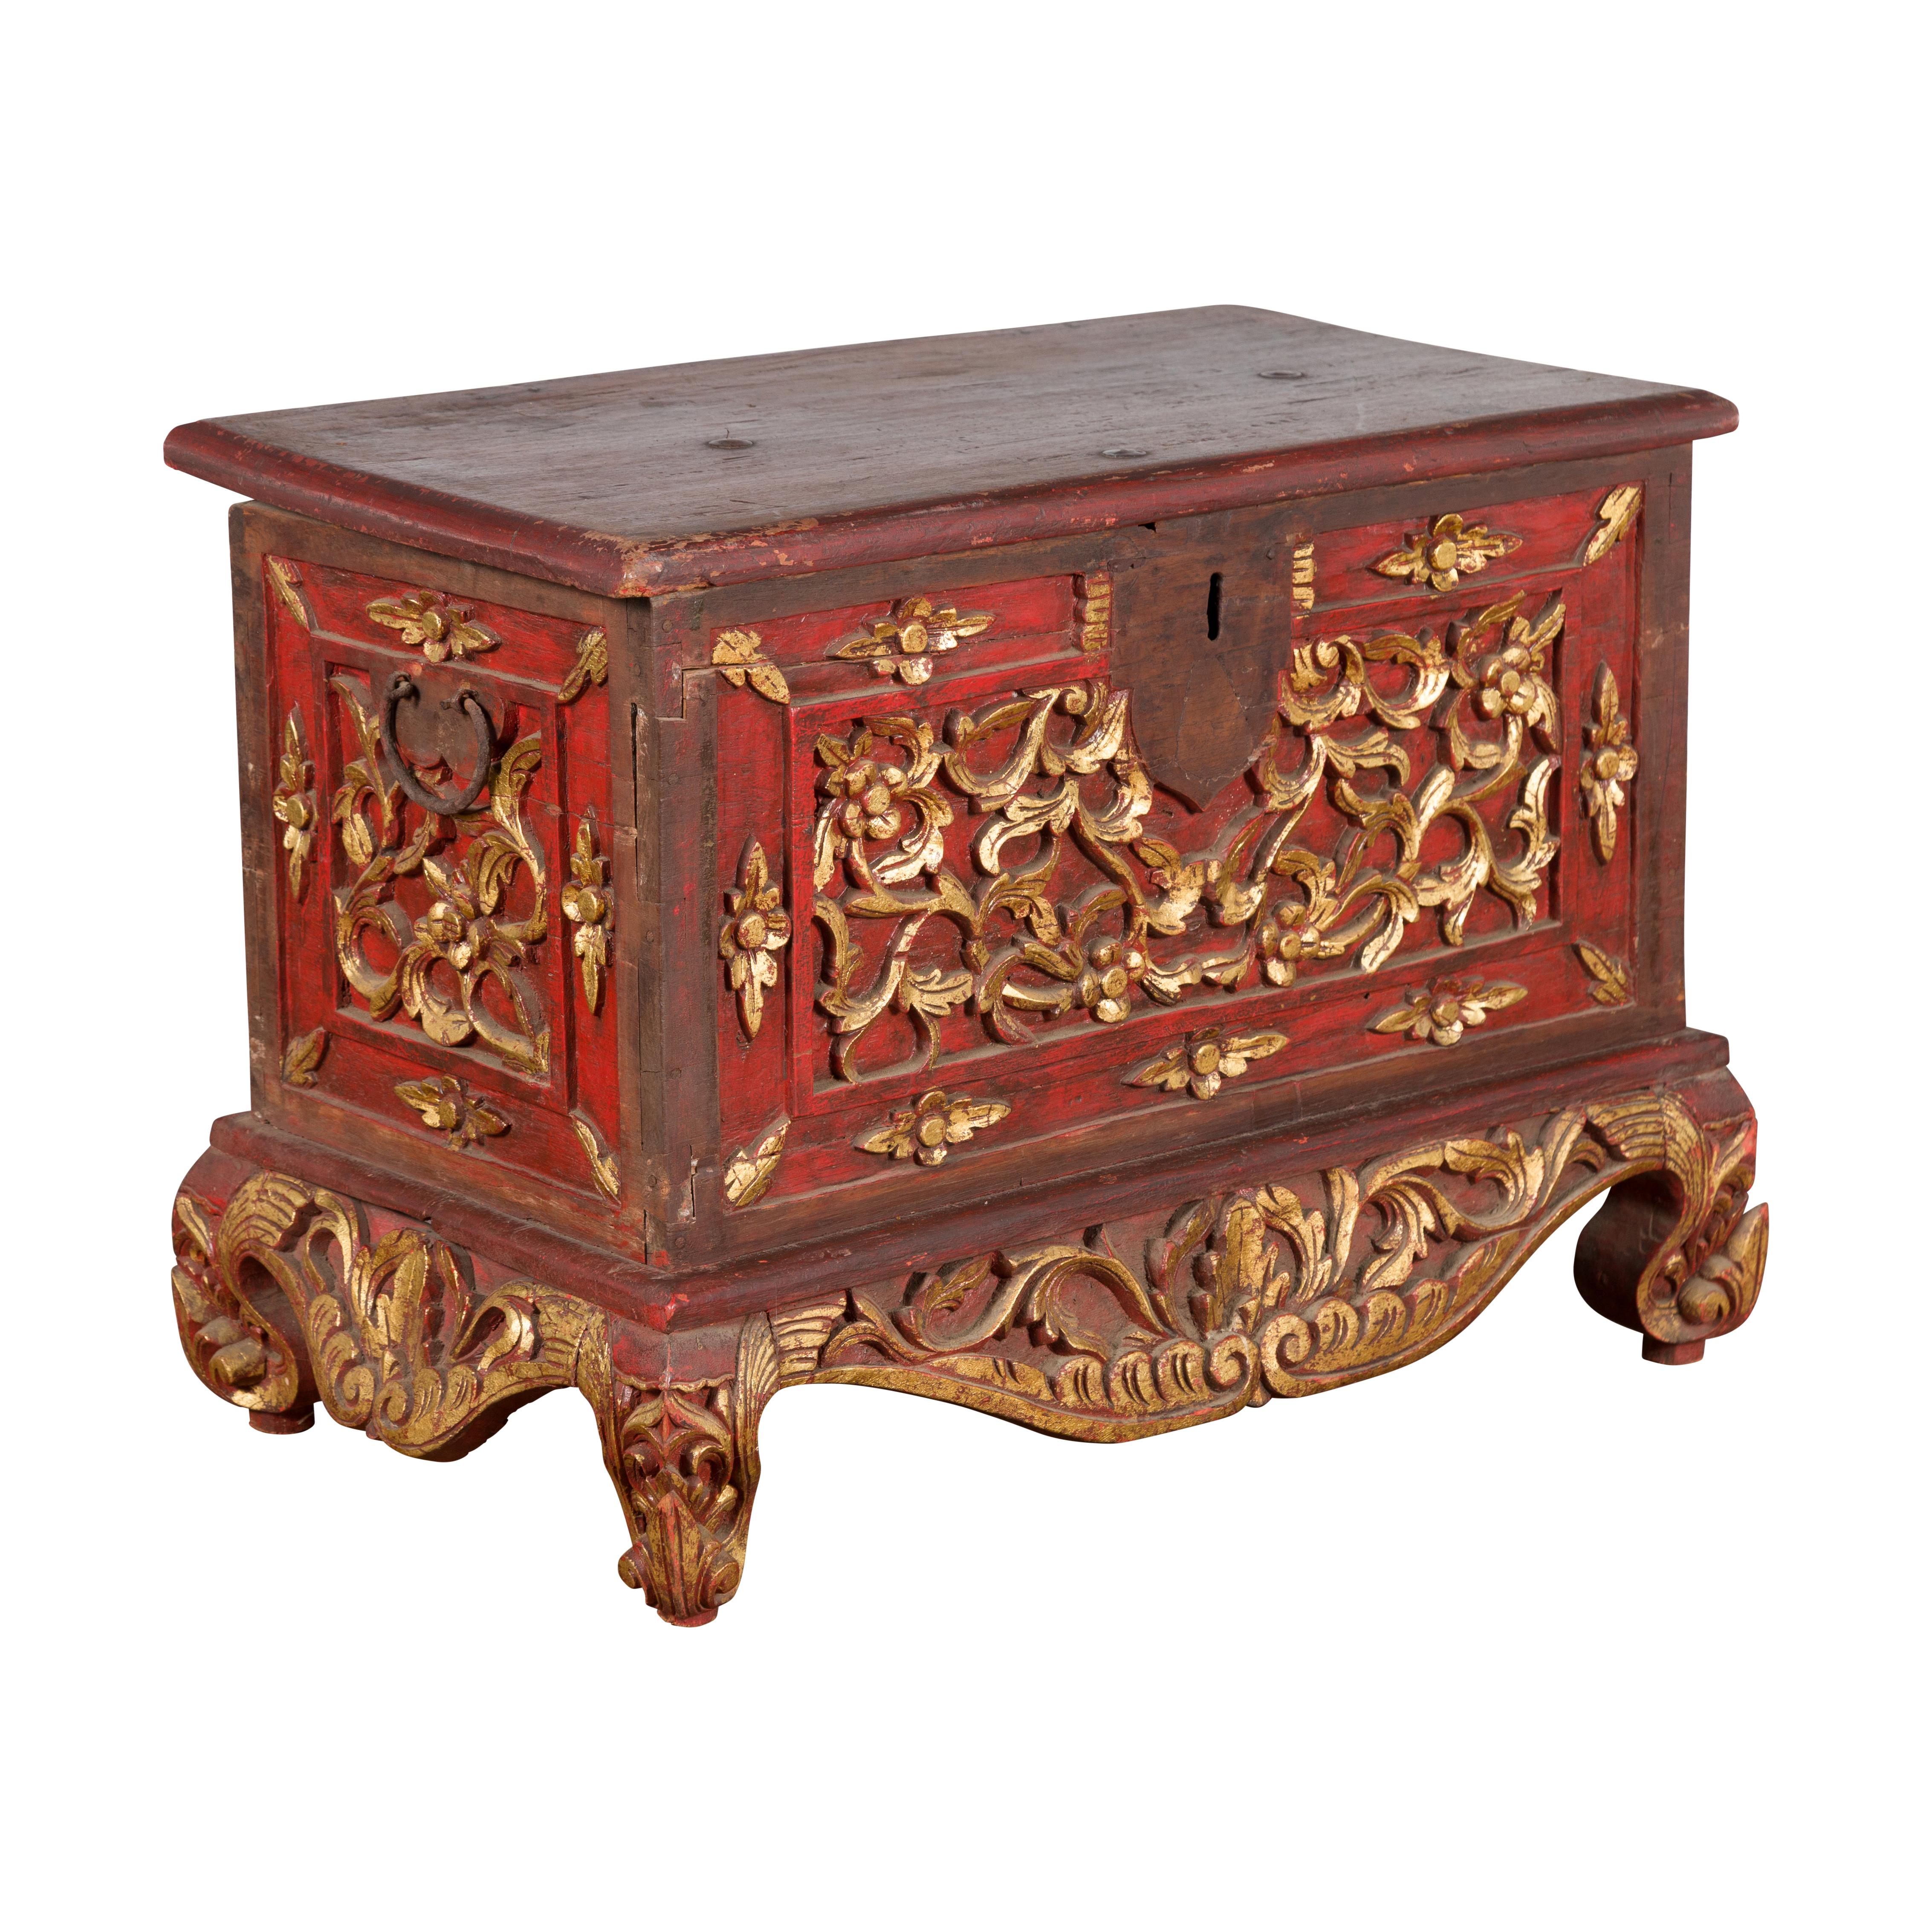 An antique Indonesian floral carved wooden treasure chest from the early 20th century, with red and gold accents. Created on the island of Madura off of the northeastern coast of Java, this treasure chest attracts our attention with its contrasting